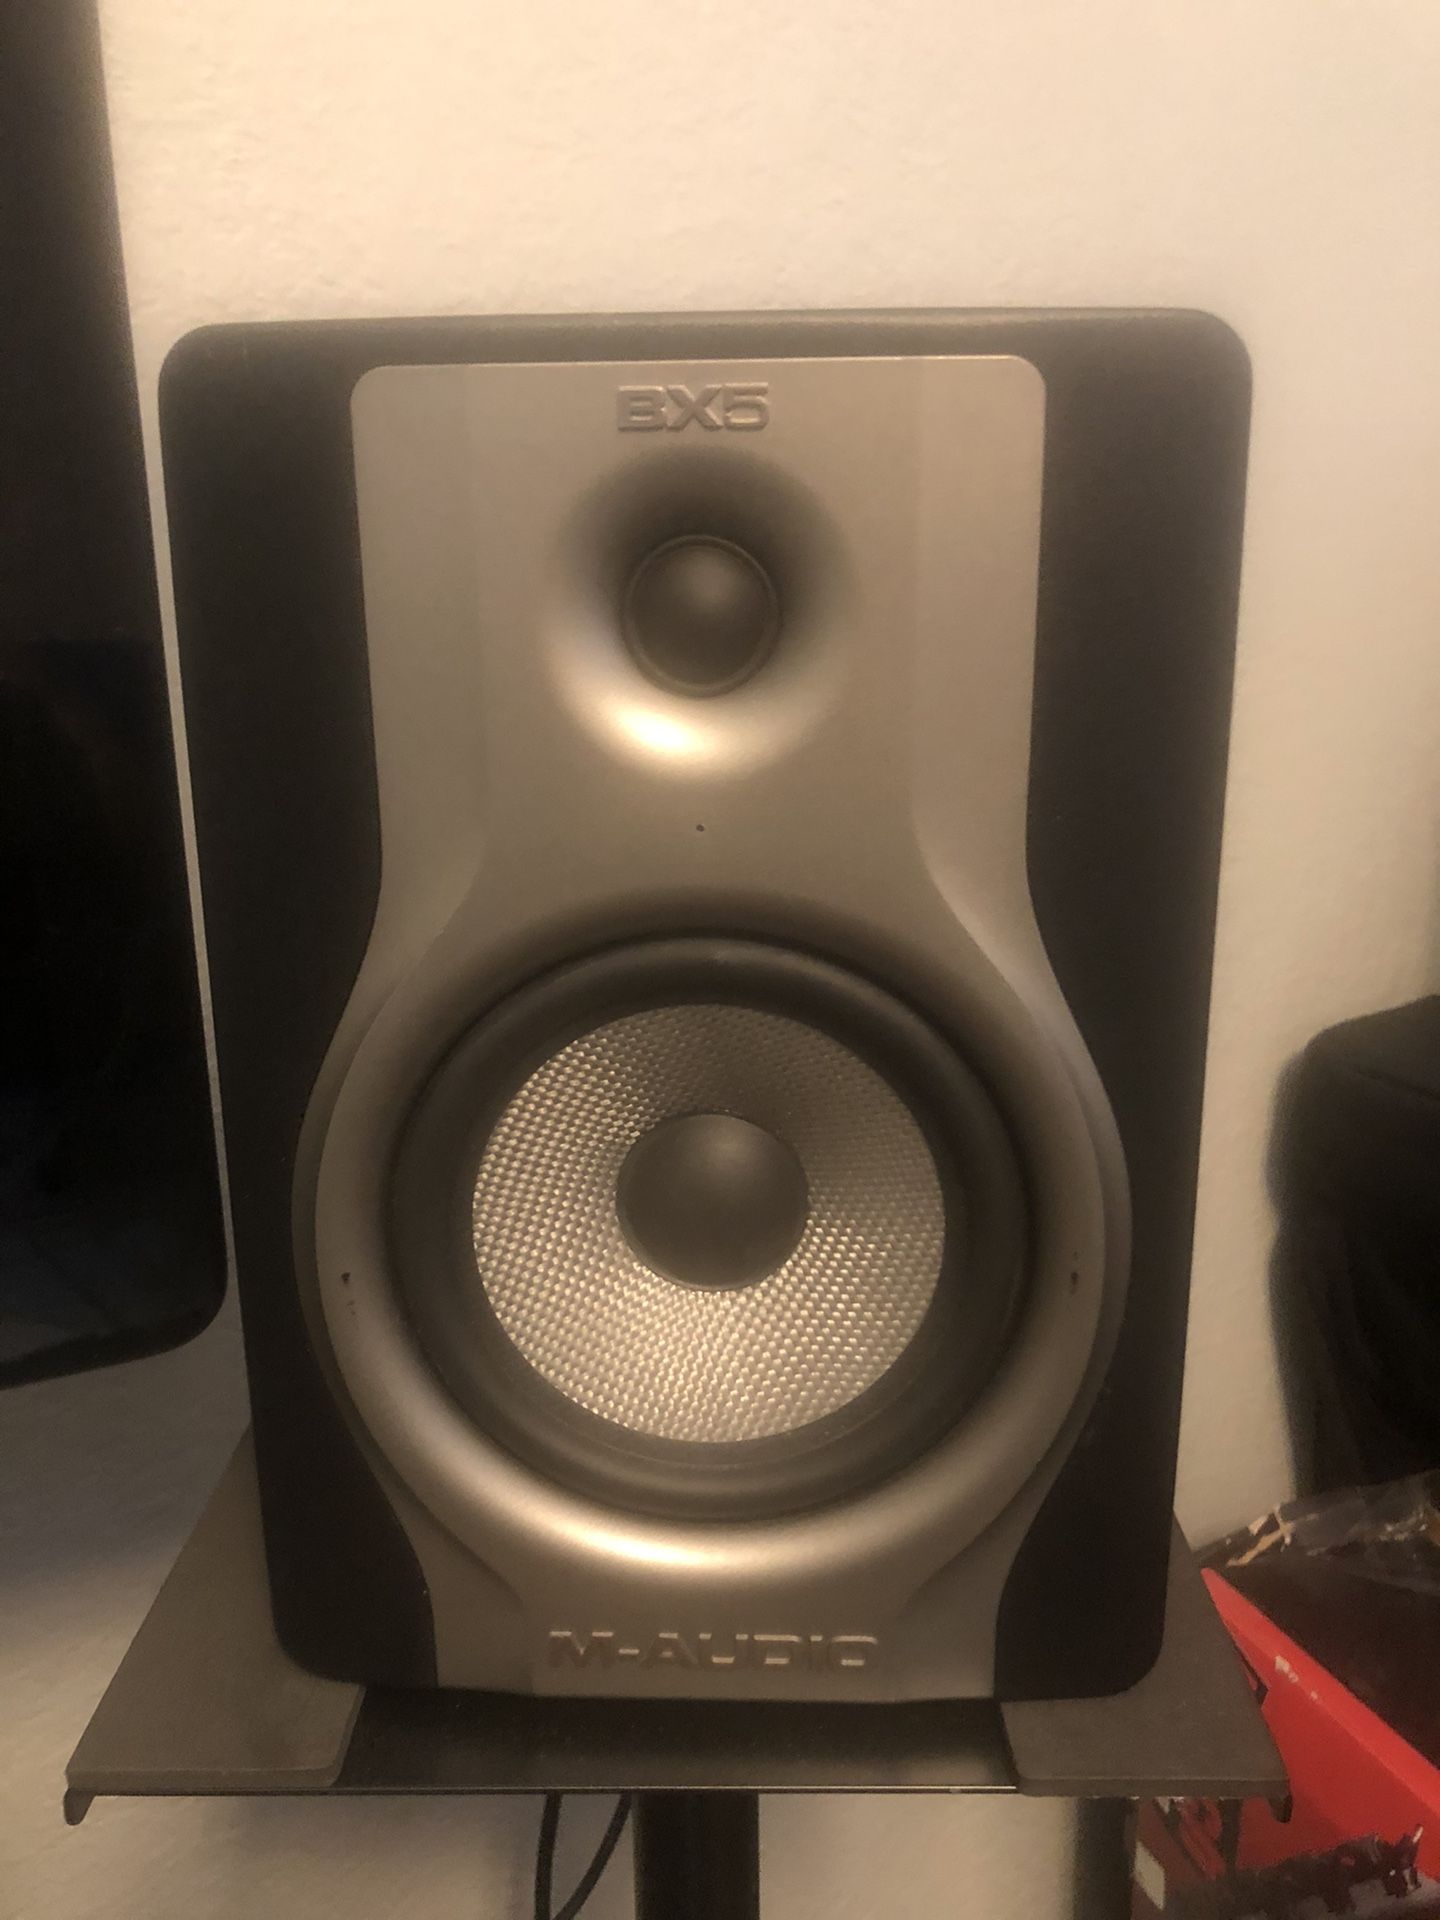 Studio speakers and audio interface blow out 280